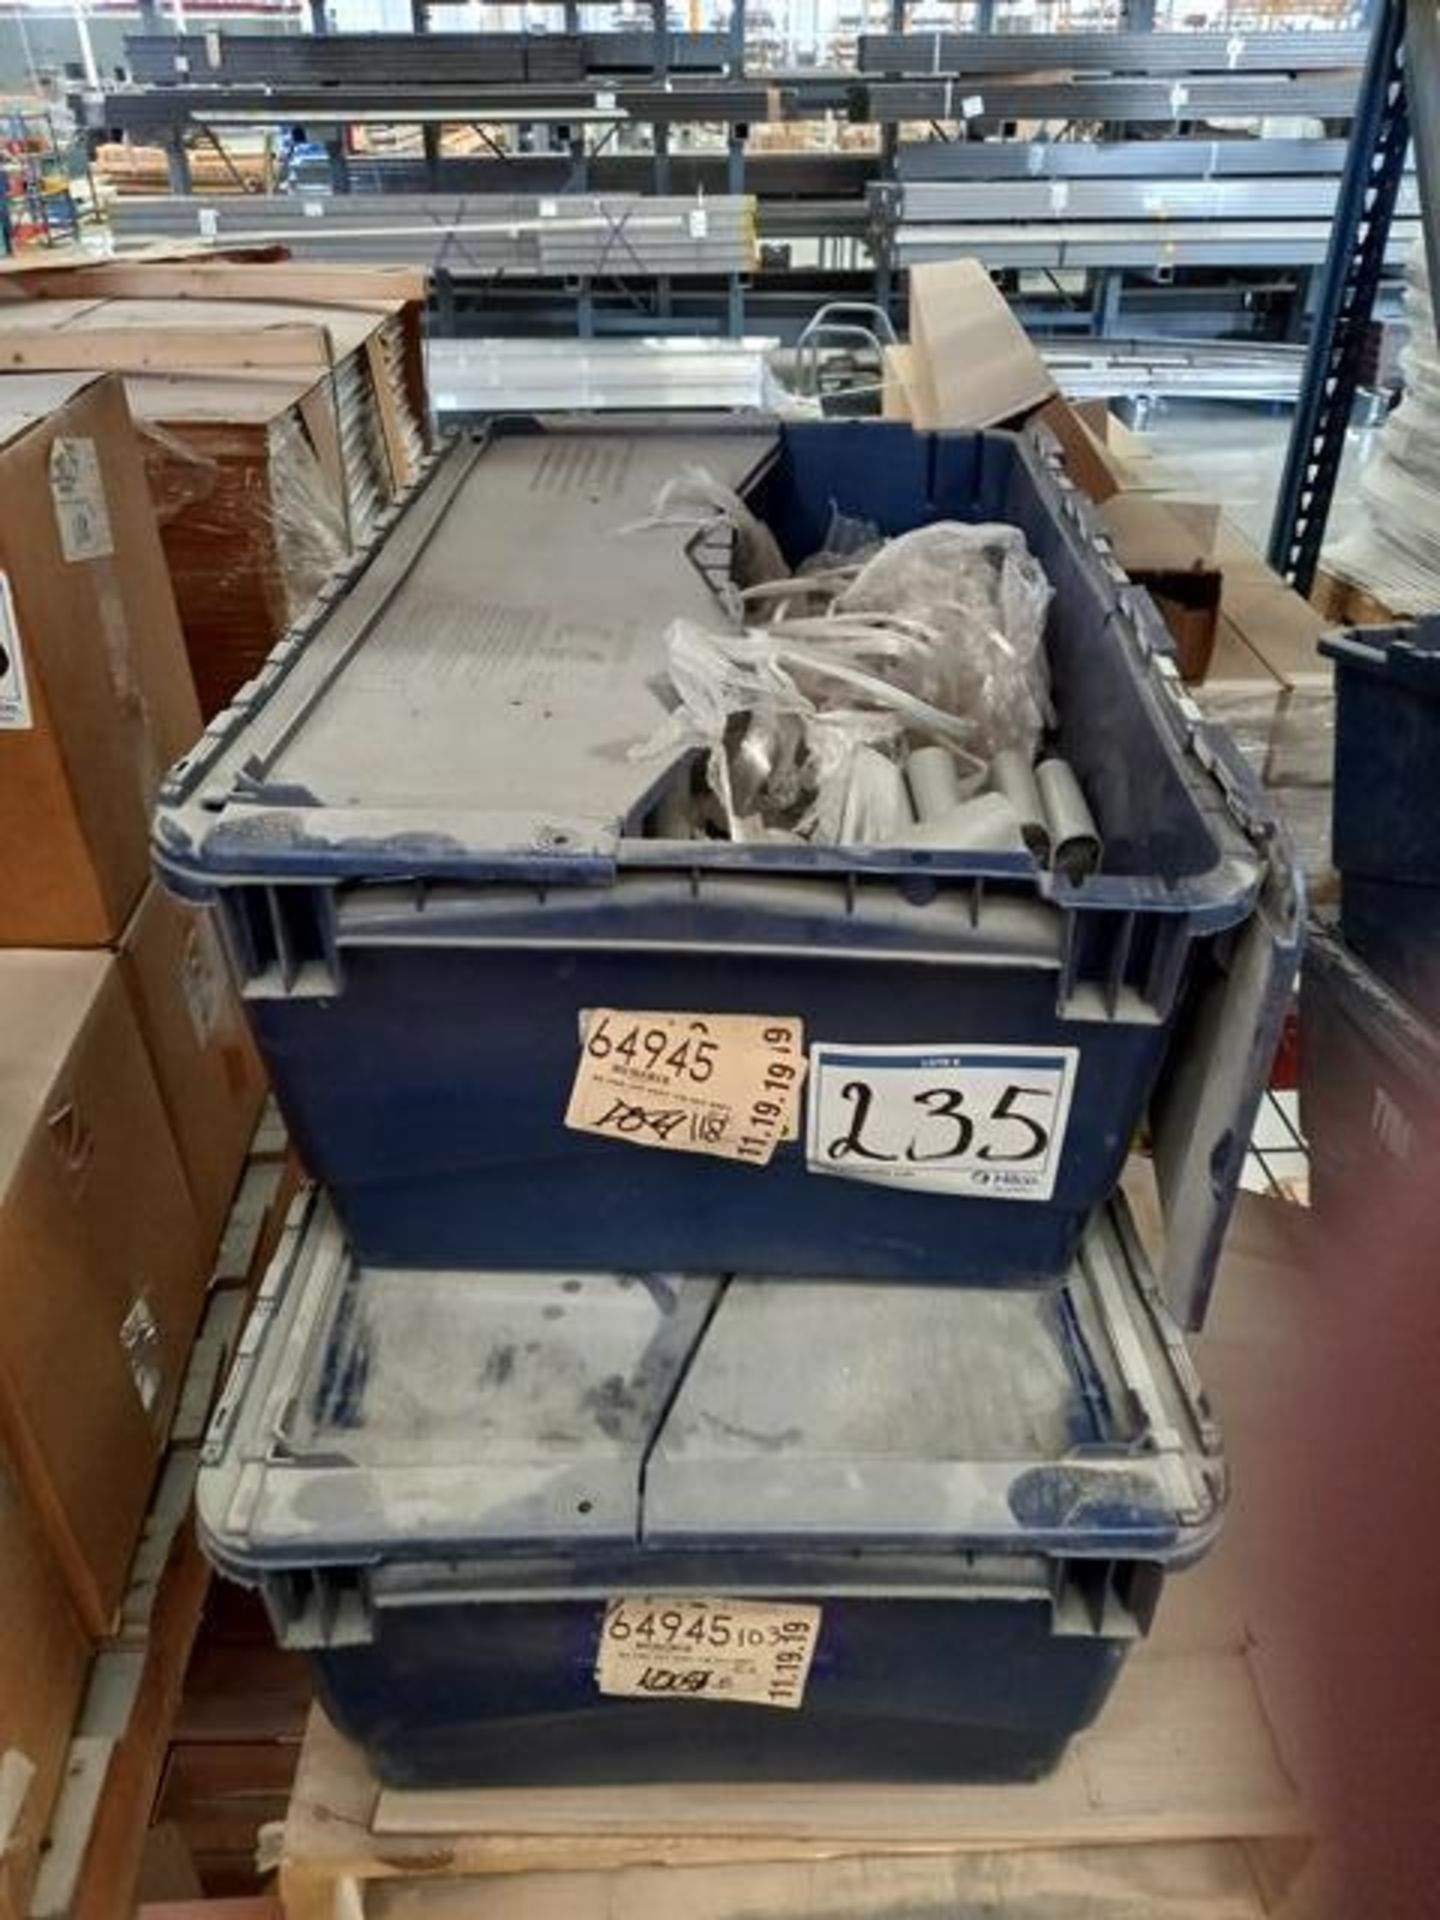 LOT: Miscellaneous Materials And Fittings: (176) Pieces Of End Cap Lw, 64x Ipd 3.125, (324) Pieces - Image 24 of 24